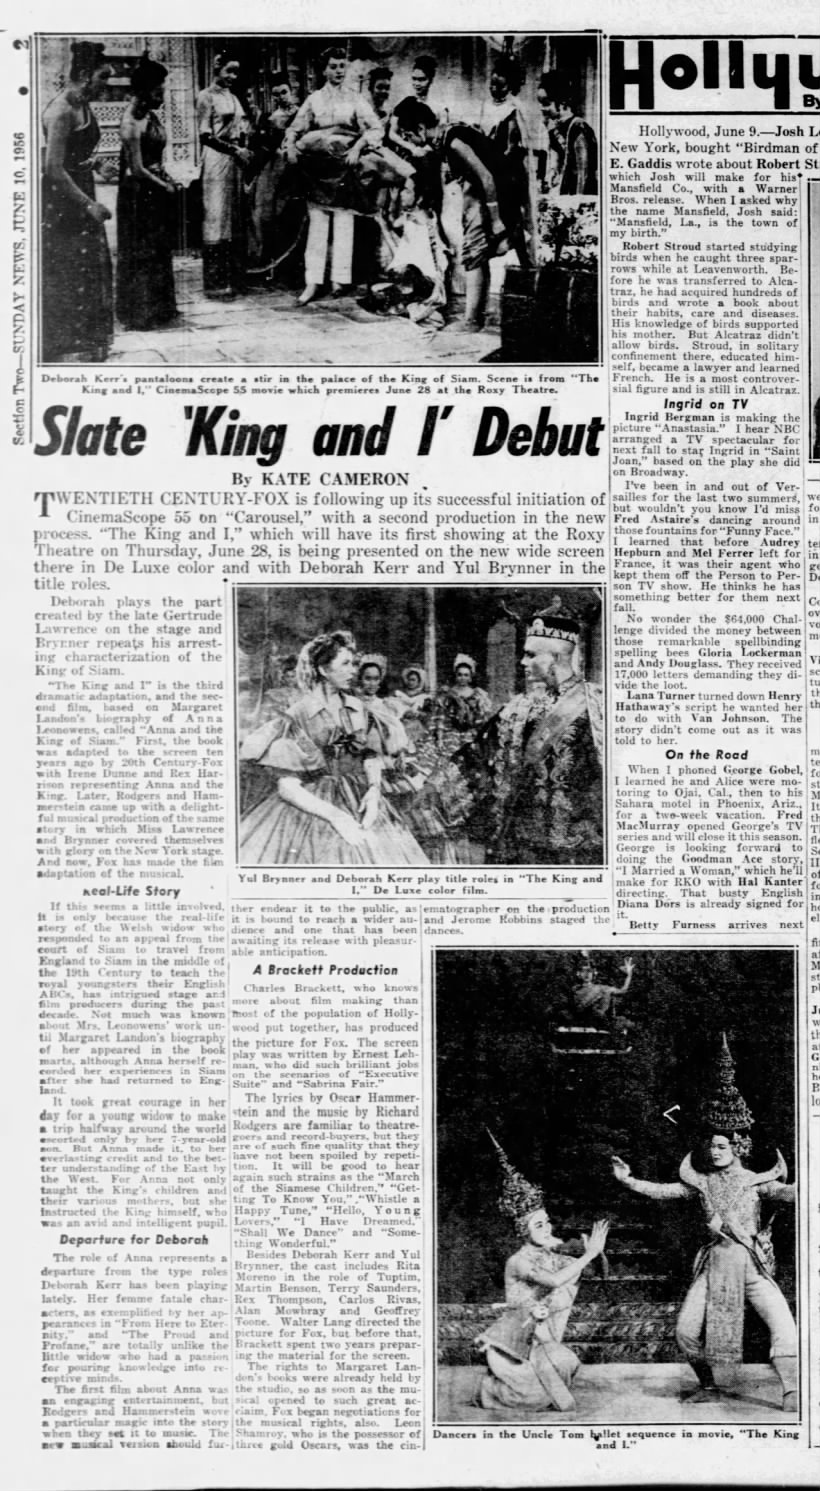 Kate Cameron, "Slate 'King and I' Debut," New York Daily News, 10 June 1956, Sec. 2, Page 2.